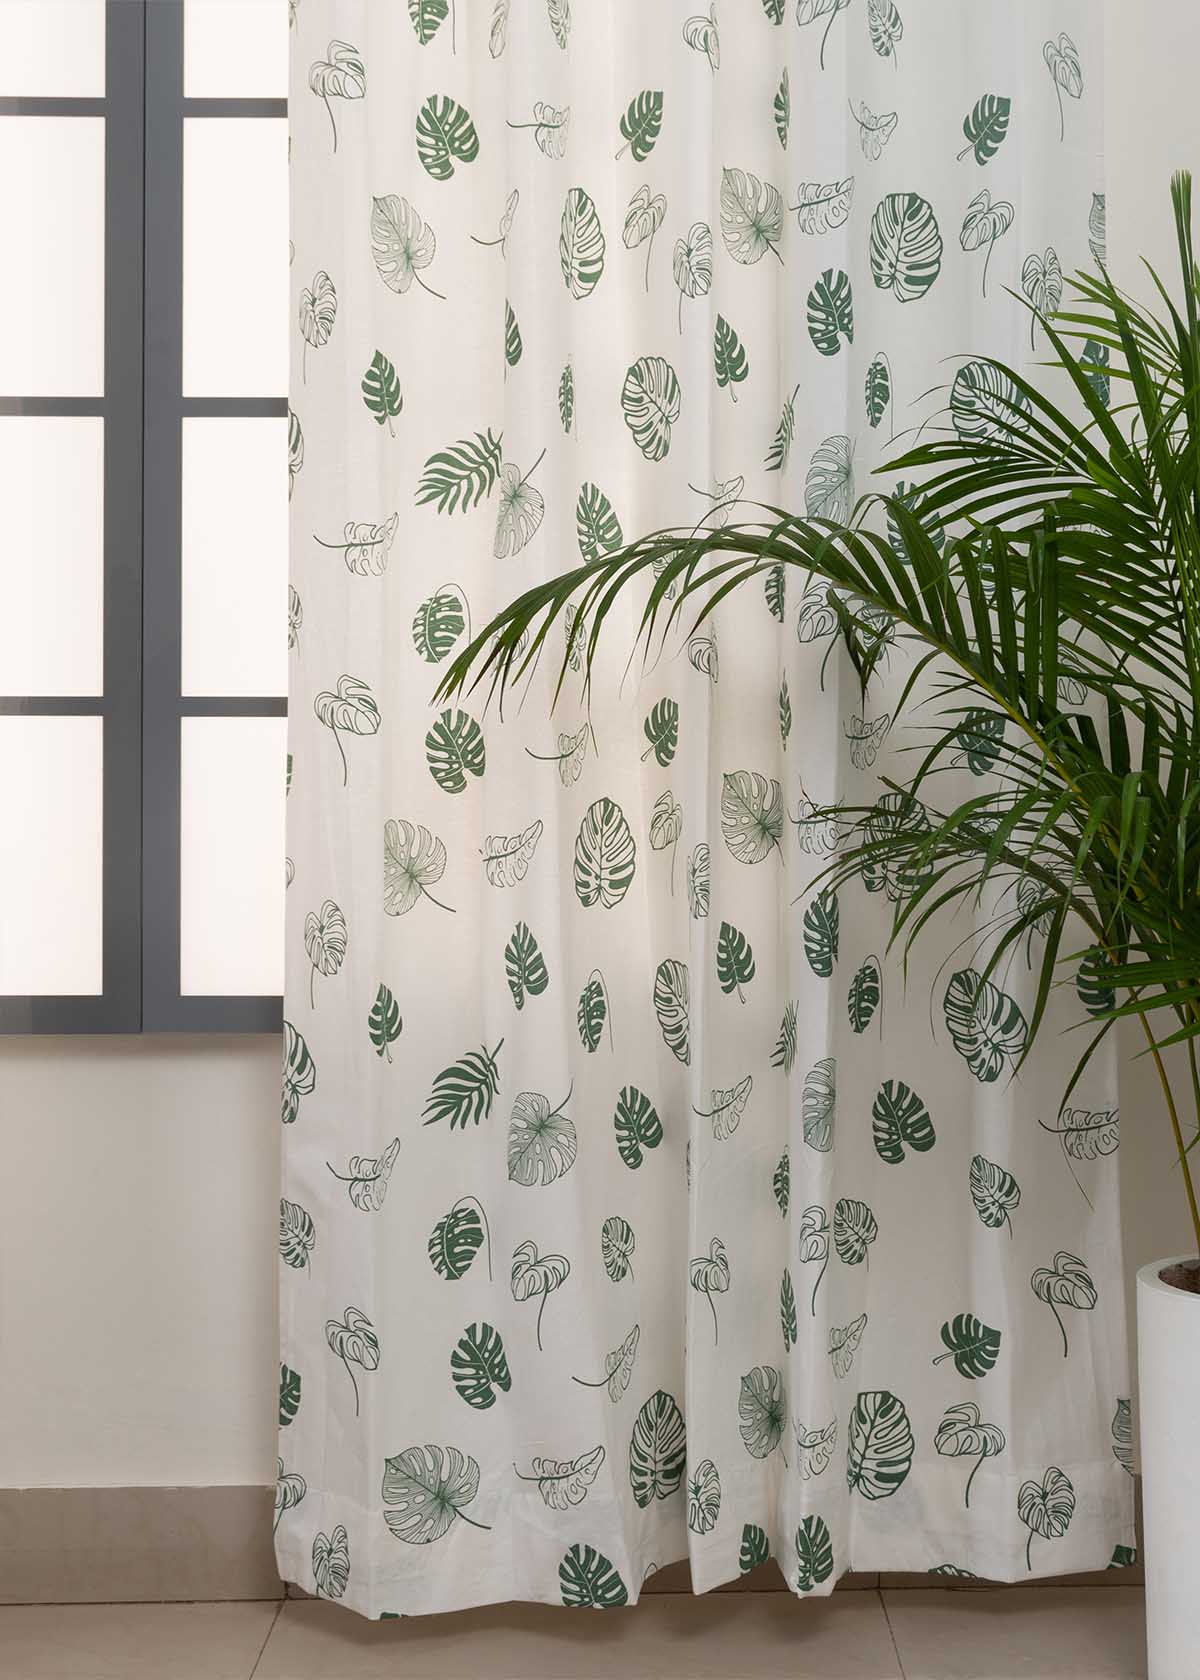 Monstera Printed 100% cotton floral curtain for living room - Room darkening - Green - Pack of 1